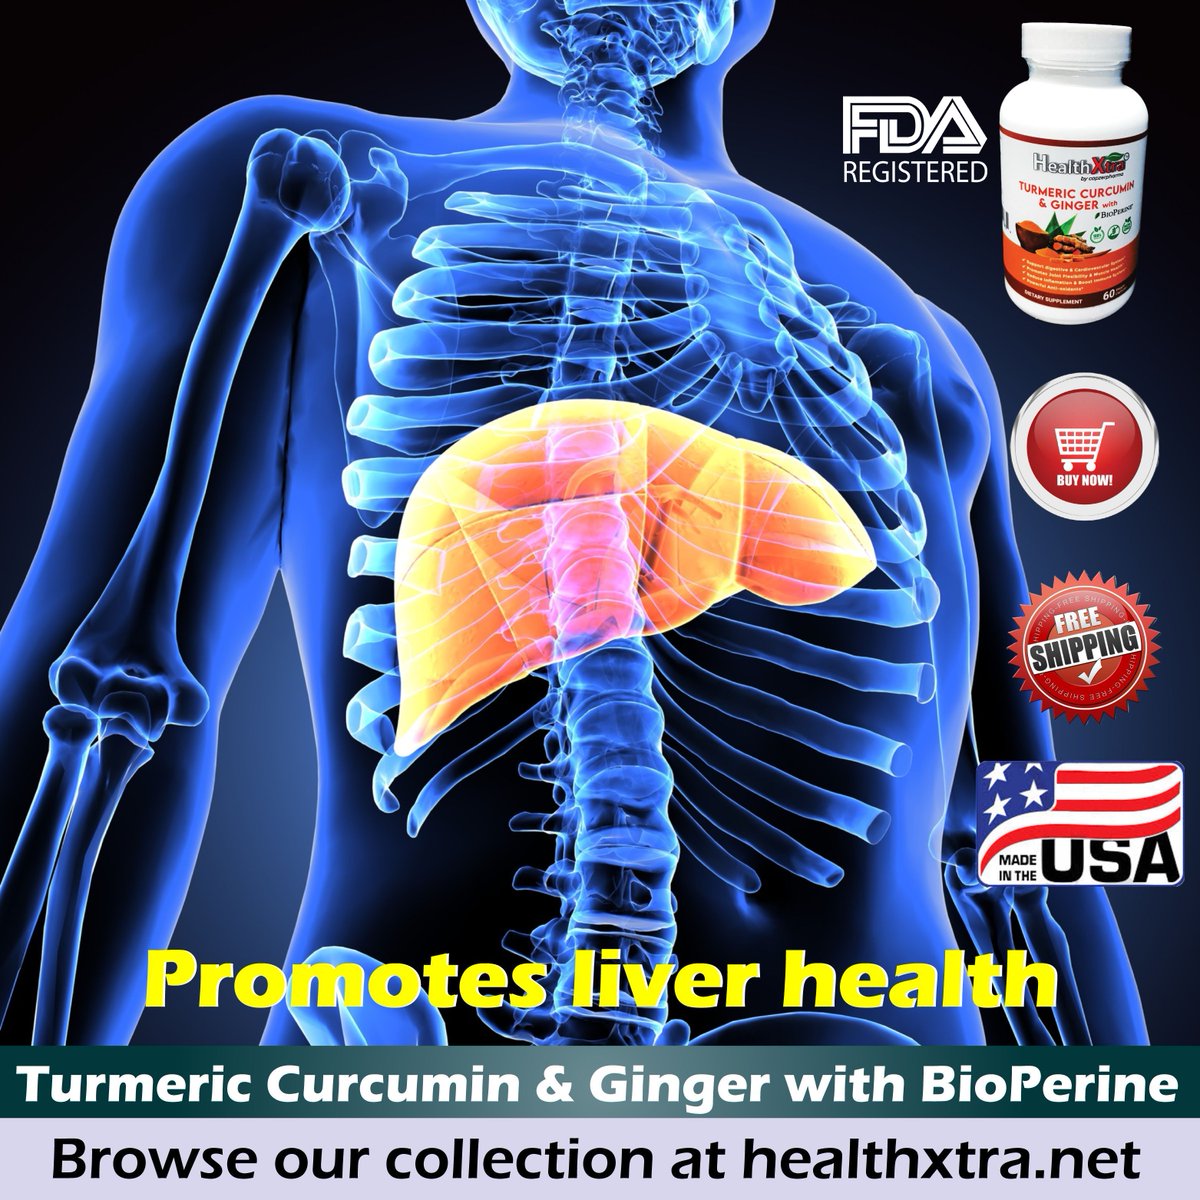 Browse our collection: healthxtra.net
Our products are available on ebay: ebay.com/str/healthxtra…
#turmeric
#turmericbenefits
#skincare
#bonehealth
#antiinflammatory
#brainhealth
#digestionsupport
#cardiovascularhealth
#diabetic
#metabolismbooster
#immunebooster